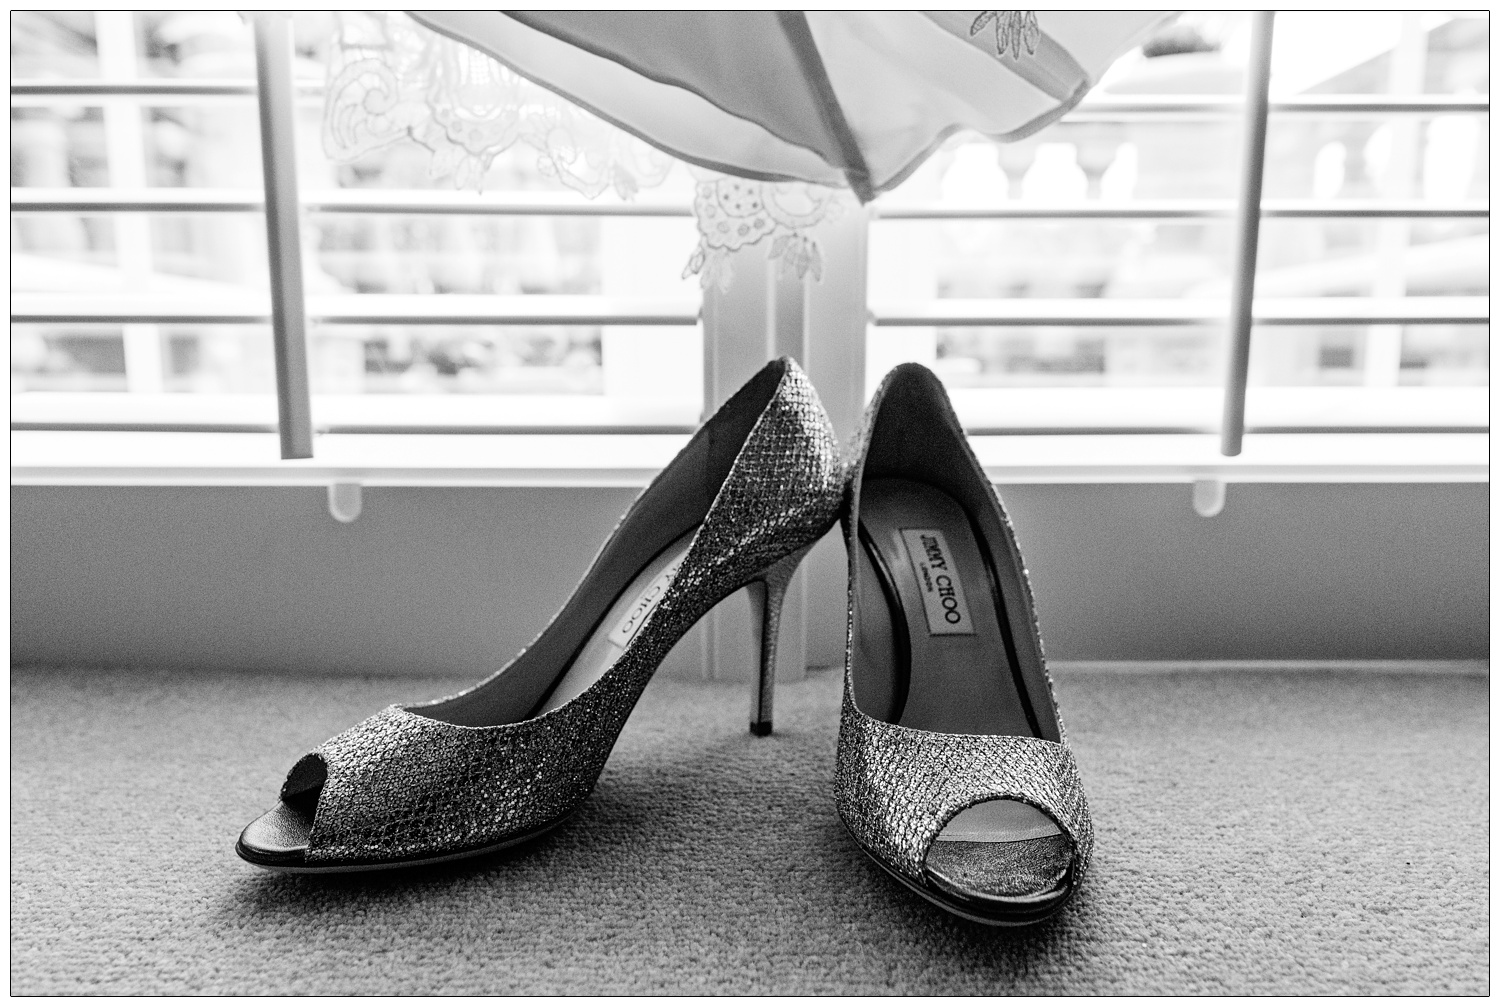 Shiny Jimmy Choo shoes place under a wedding dress. There are window shutters behind them.